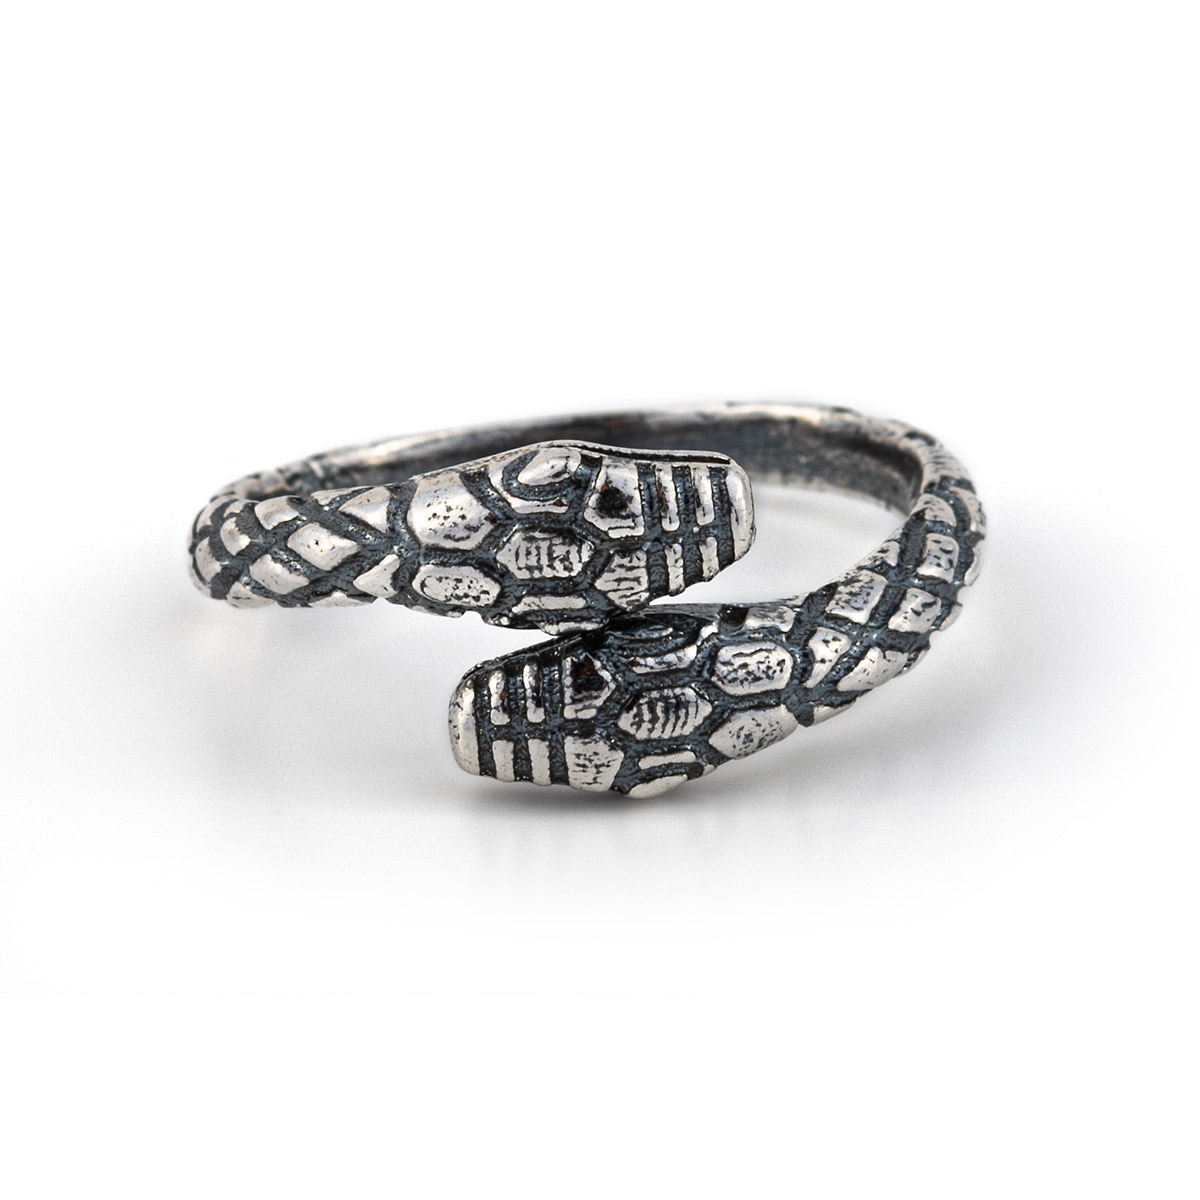 Double Headed Snake Ring – 925 Sterling Silver